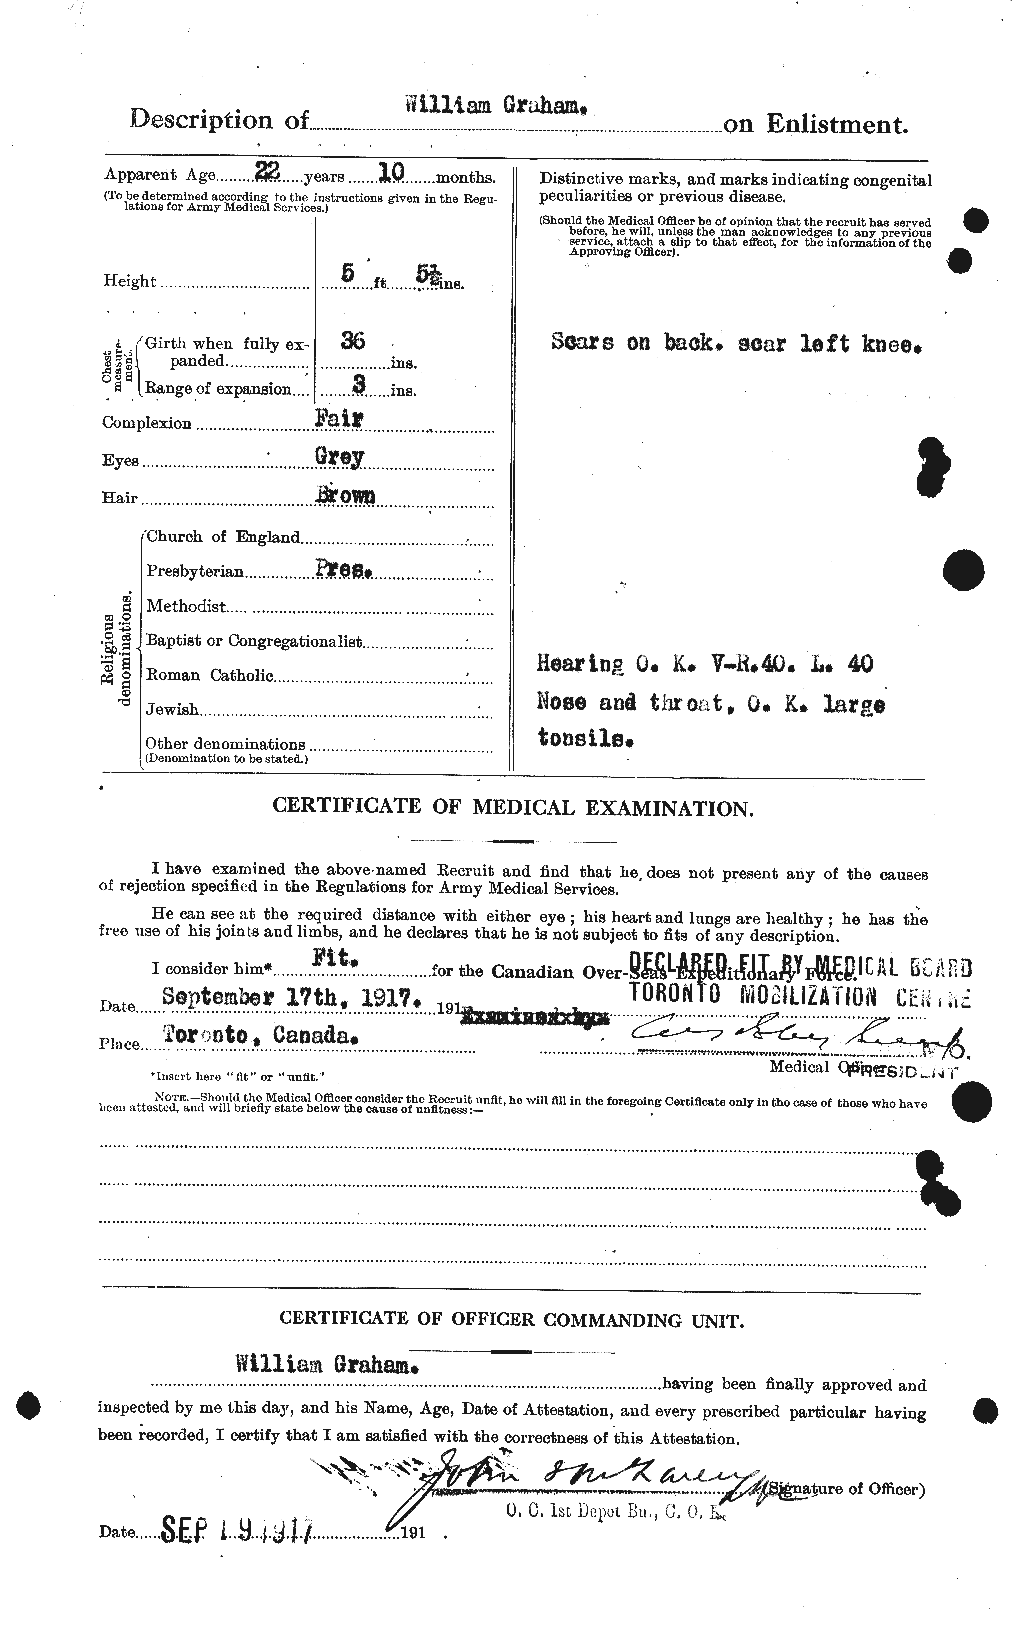 Personnel Records of the First World War - CEF 362694b